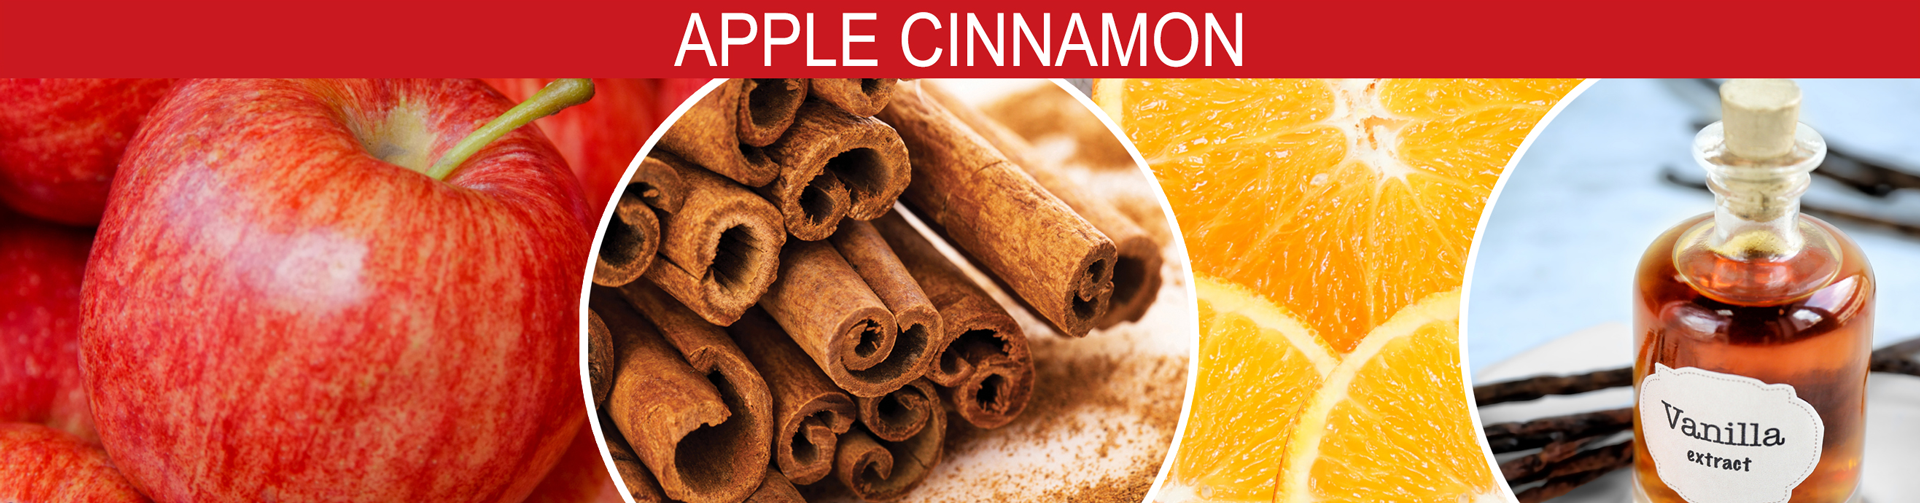 Apple Cinnamon – Banner Image of a crispy sweet red apple, with cinnamon bark and clove bud with fresh citrus notes of orange and mandarin.